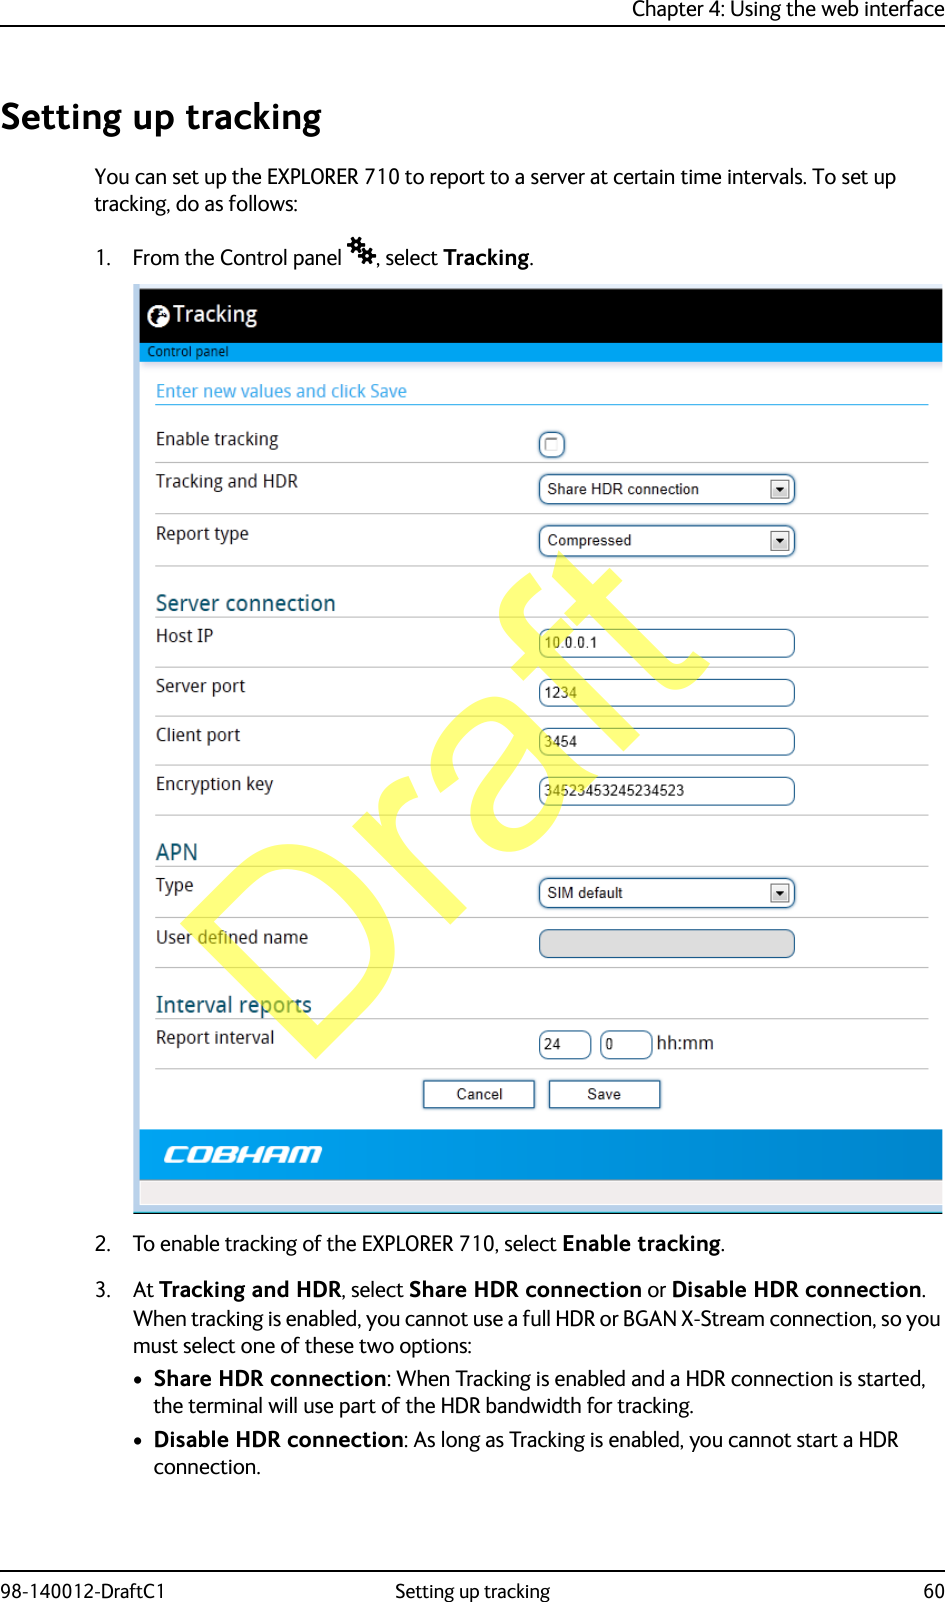 Chapter 4: Using the web interface98-140012-DraftC1 Setting up tracking 60Setting up trackingYou can set up the EXPLORER 710 to report to a server at certain time intervals. To set up tracking, do as follows:1. From the Control panel , select Tracking.2. To enable tracking of the EXPLORER 710, select Enable tracking.3. At Tracking and HDR, select Share HDR connection or Disable HDR connection.When tracking is enabled, you cannot use a full HDR or BGAN X-Stream connection, so you must select one of these two options:•Share HDR connection: When Tracking is enabled and a HDR connection is started, the terminal will use part of the HDR bandwidth for tracking.•Disable HDR connection: As long as Tracking is enabled, you cannot start a HDR connection.Draft